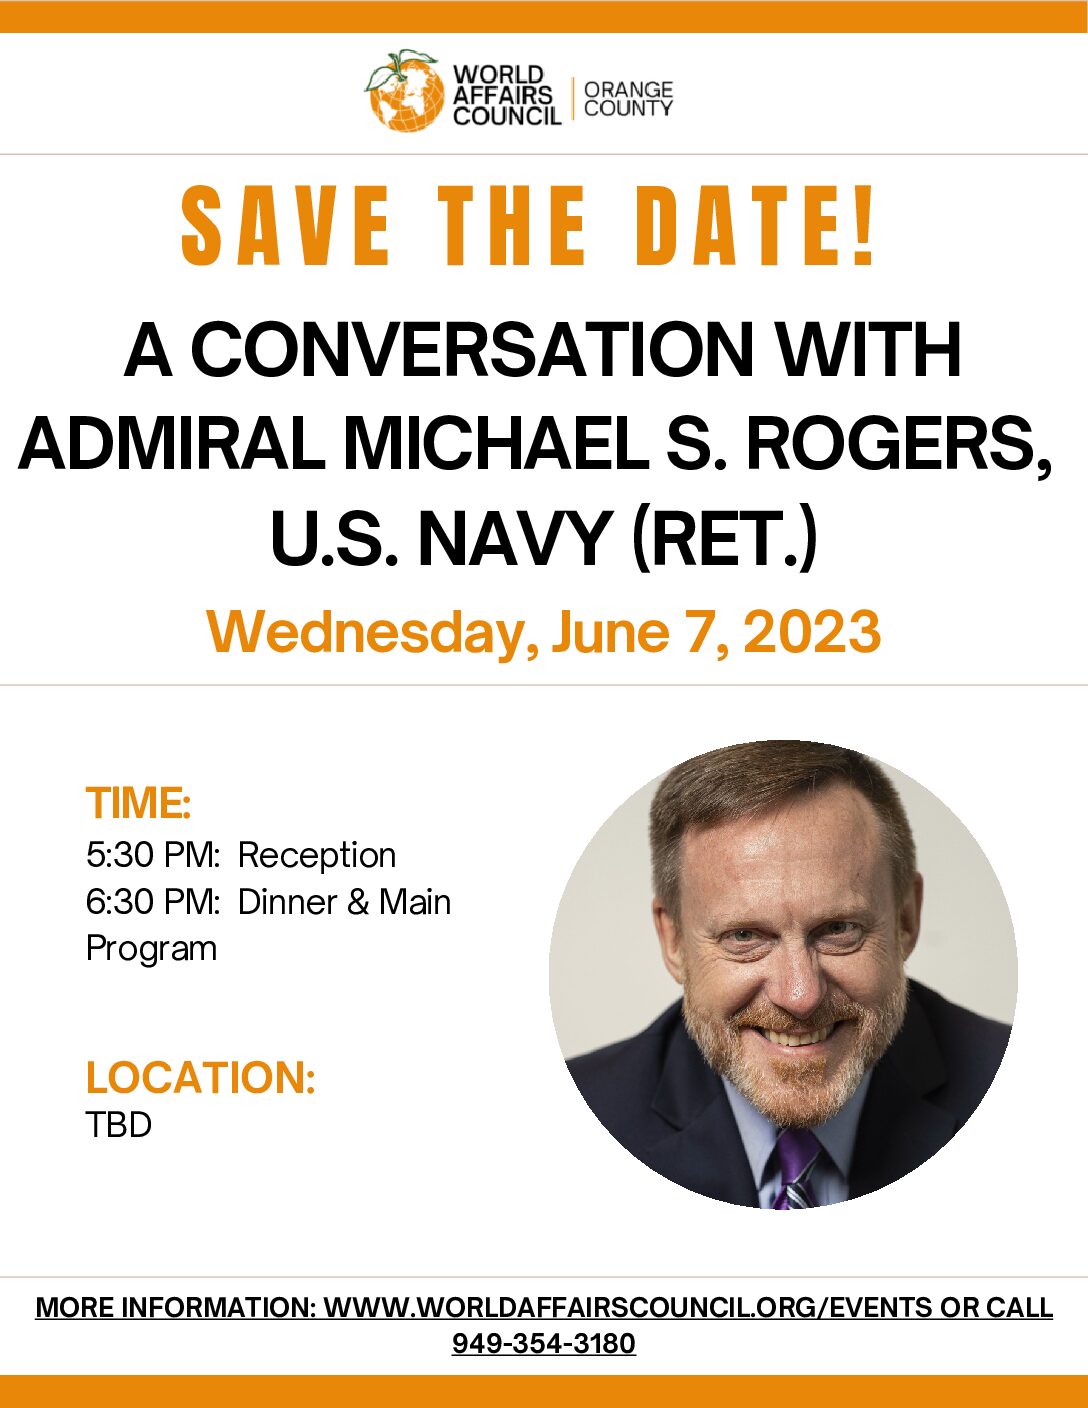 A Conversation with Admiral Michael S. Rogers, U.S. Navy (ret.)